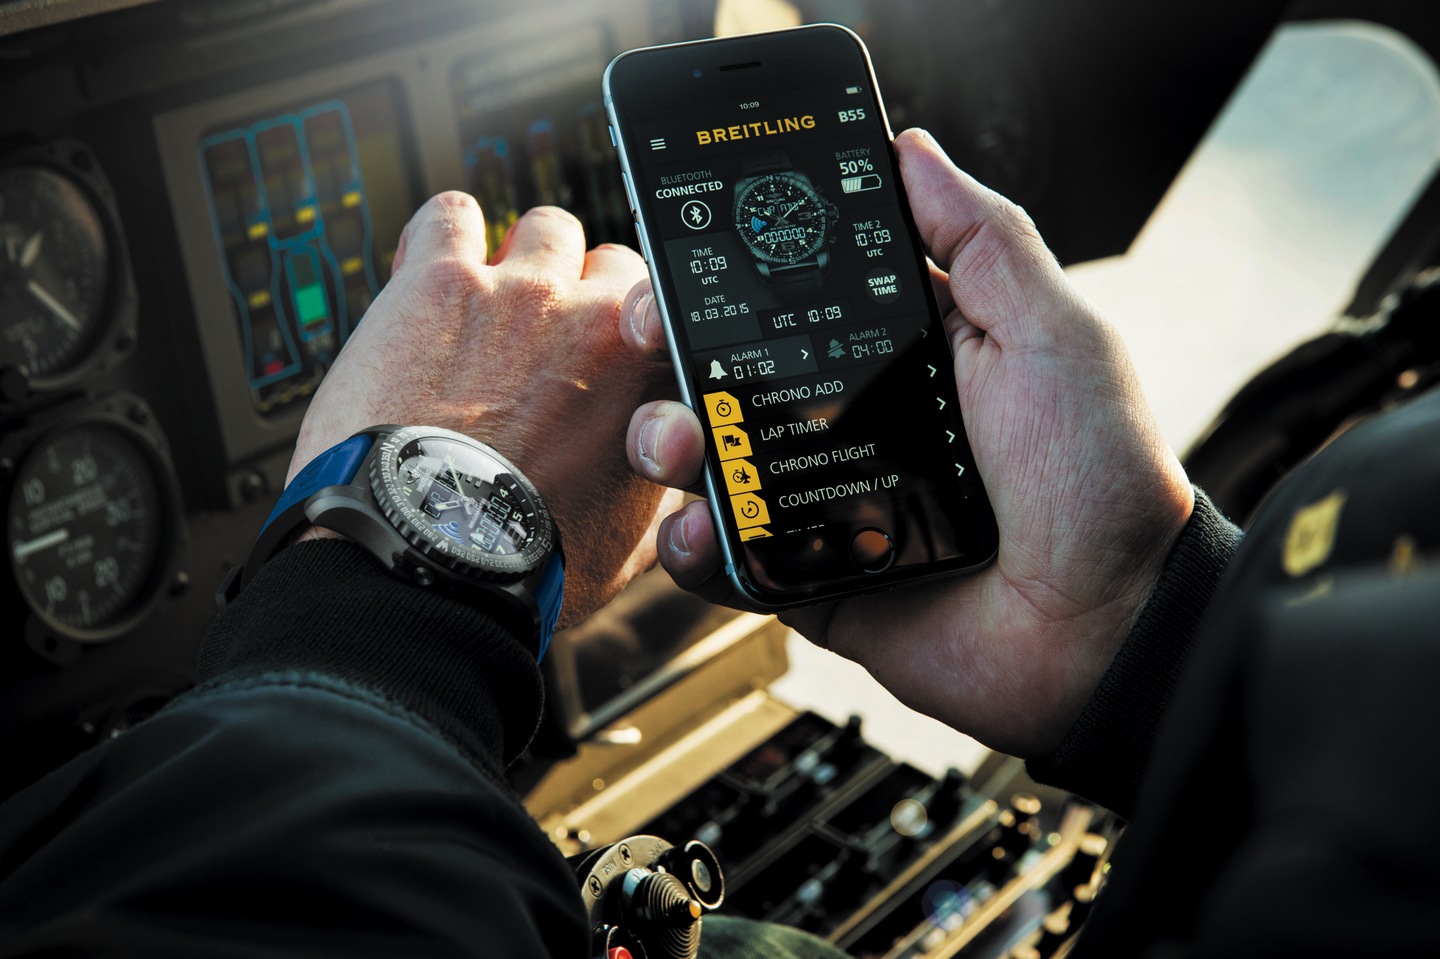 Pre-Baselworld 2015: Breitling B55 Connected